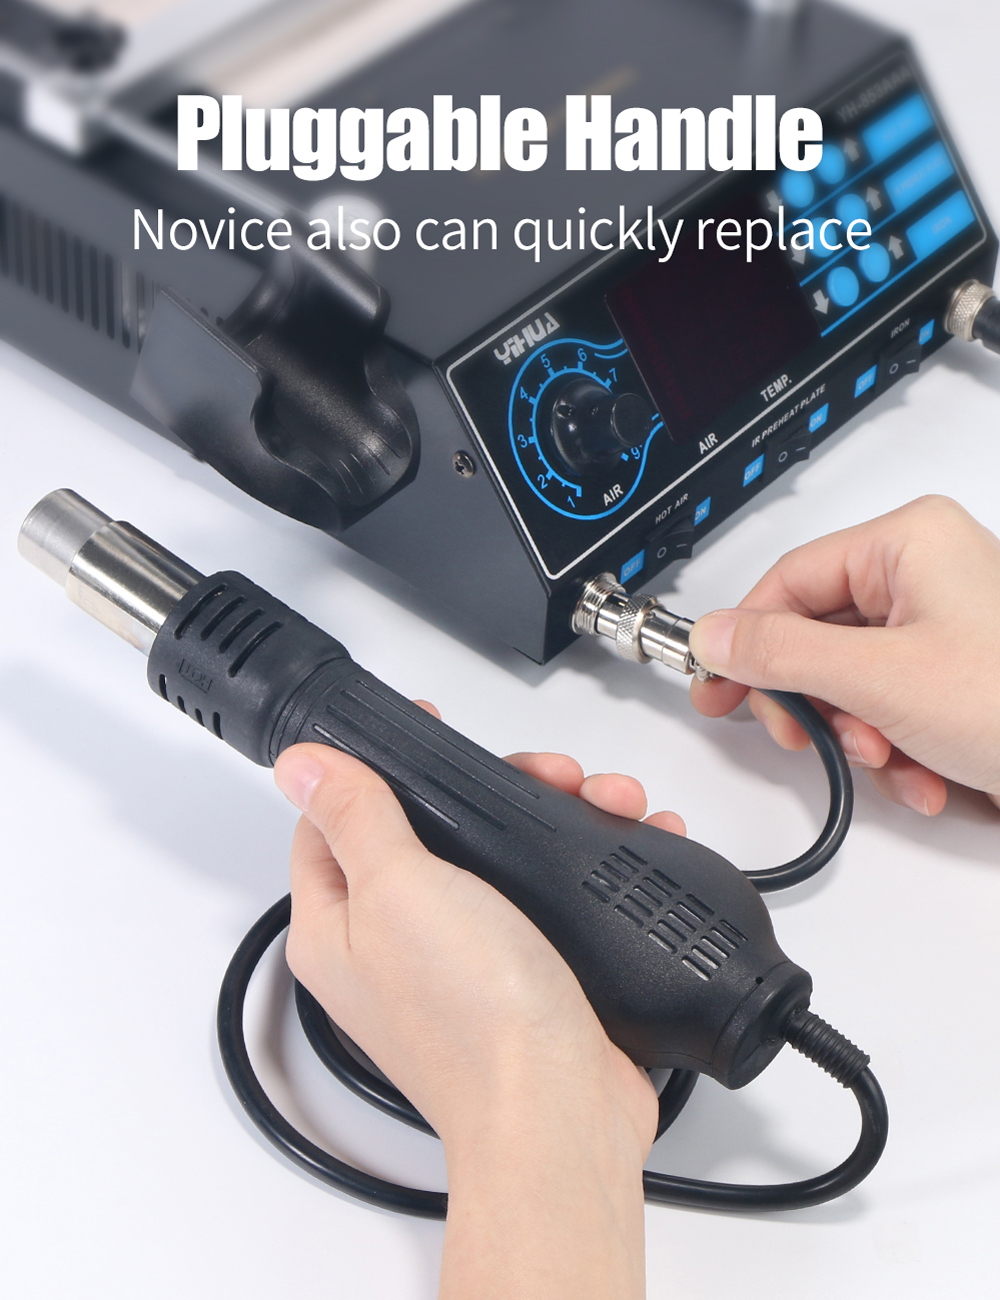 YIHUA-853AAA-220V-3-In-1-Preheating-Station-Infrared-BGA-Rework-Soldering-Station-Hot-Air-Tool-60W-T-1390780-11